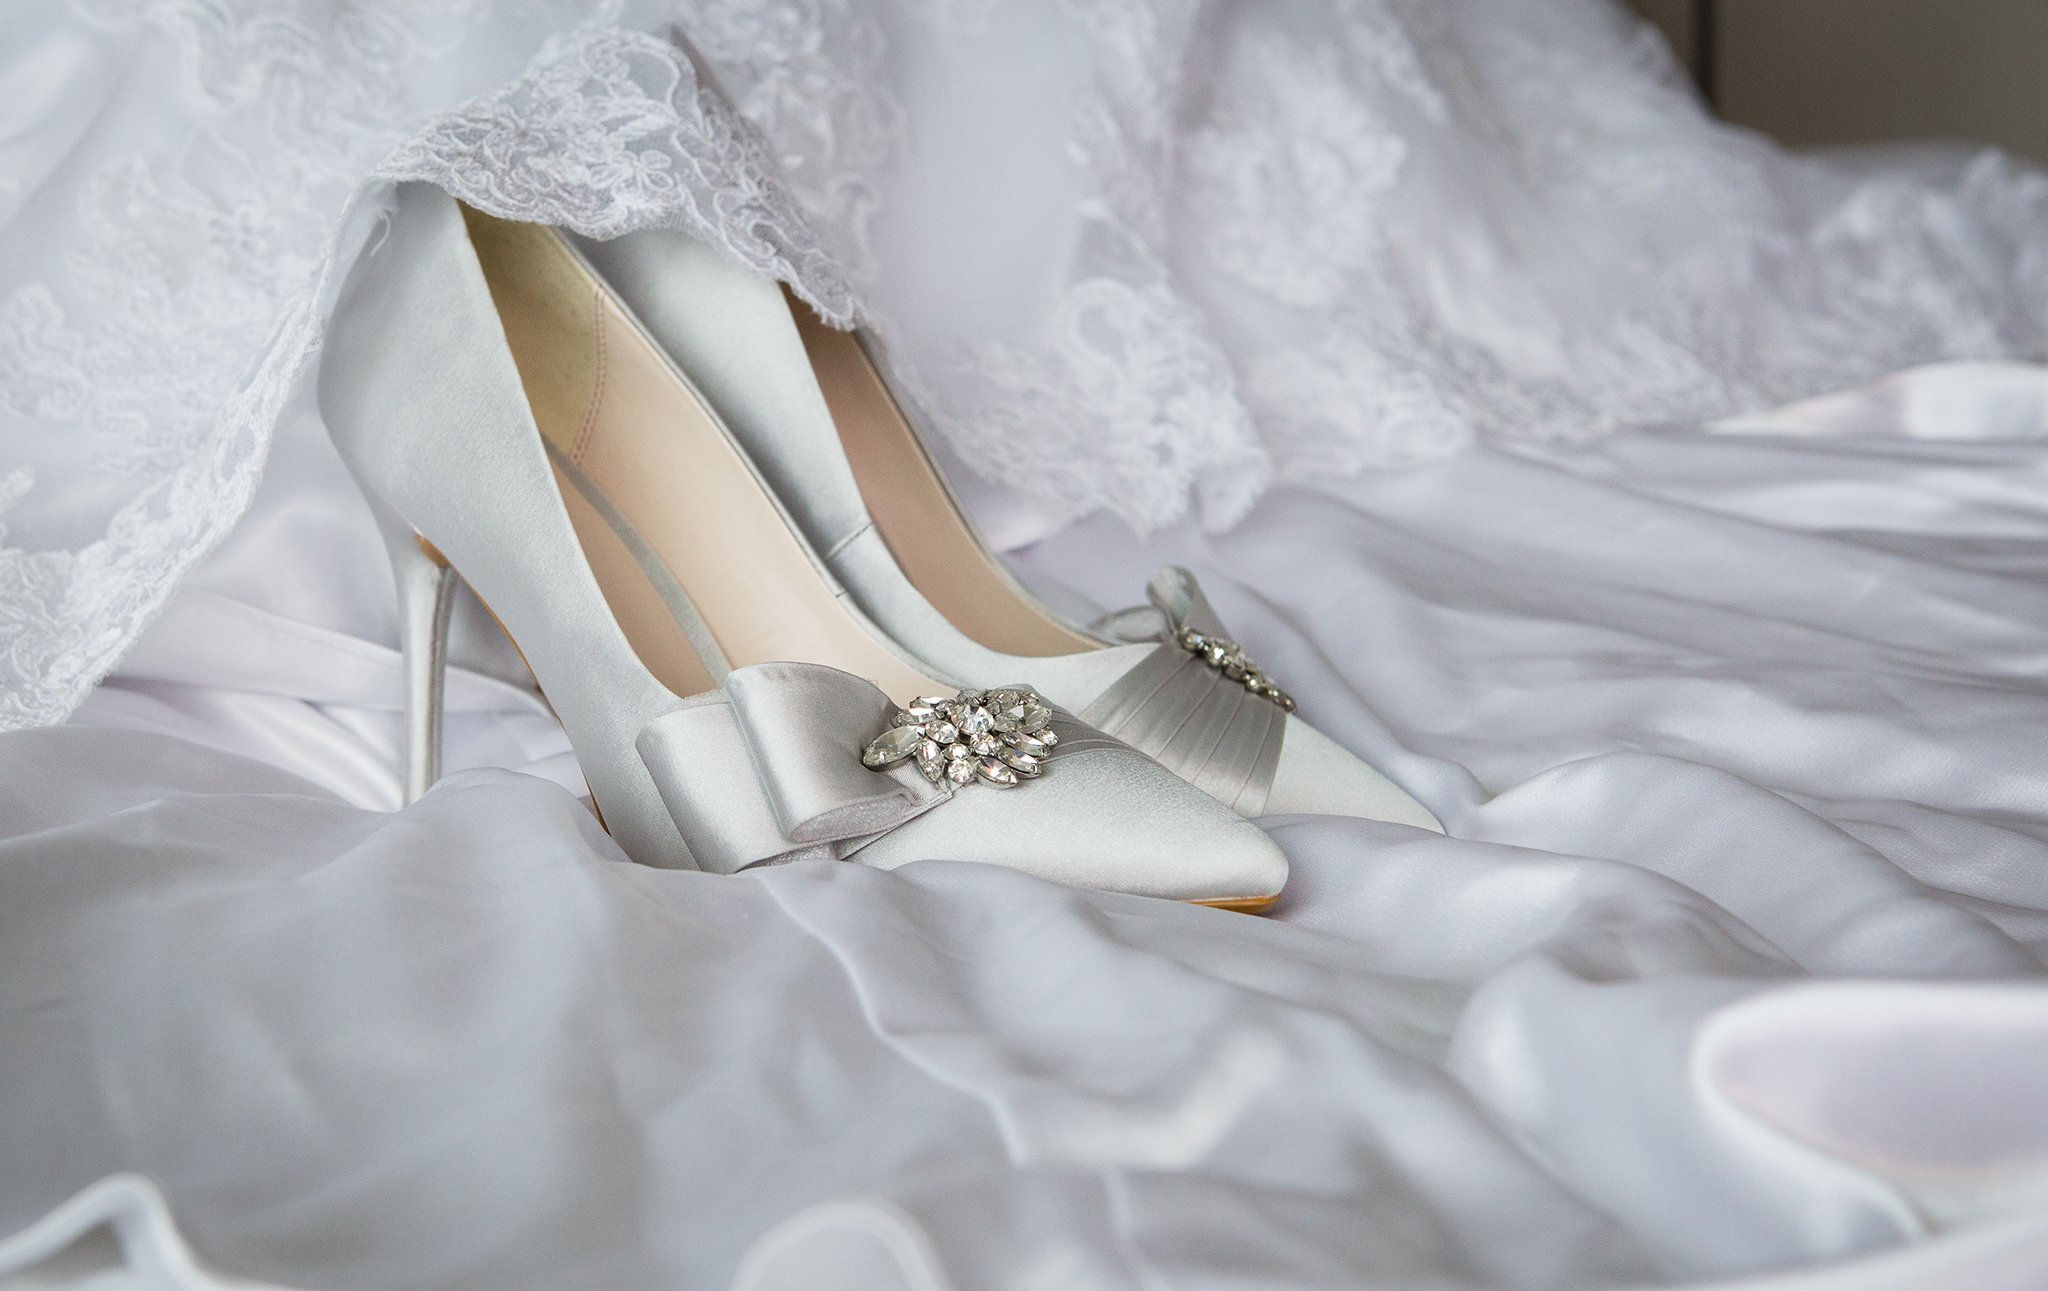 Satin shoes are popular among brides because of the minimalistic, effortless elegance